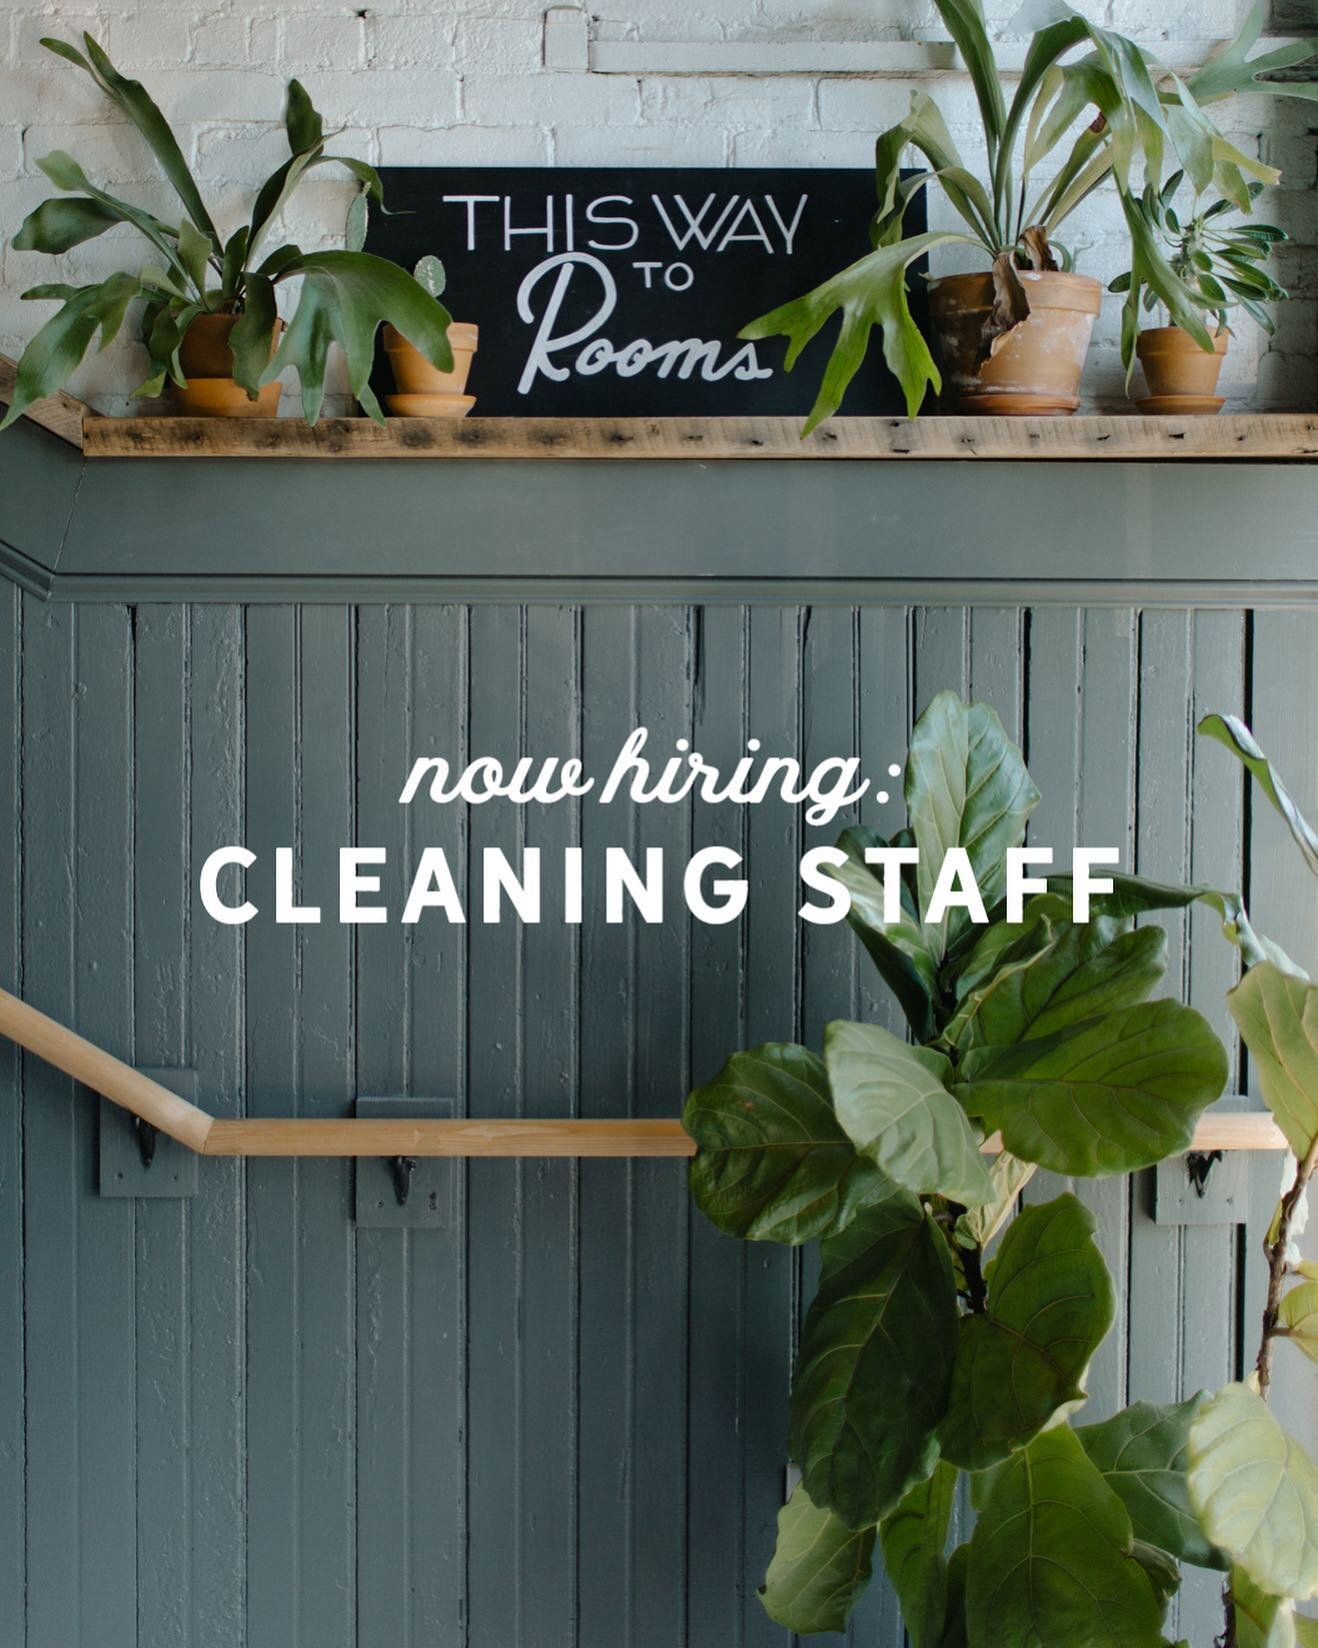 We&rsquo;re looking for extra help on the weekends! Now hiring cleaning staff for Sat-Sun, 10-4pm for our @culturecstreet hotel rooms. (Occasional weekday opportunities as well.) If you&rsquo;ve applied for this role in the past already send us a mes